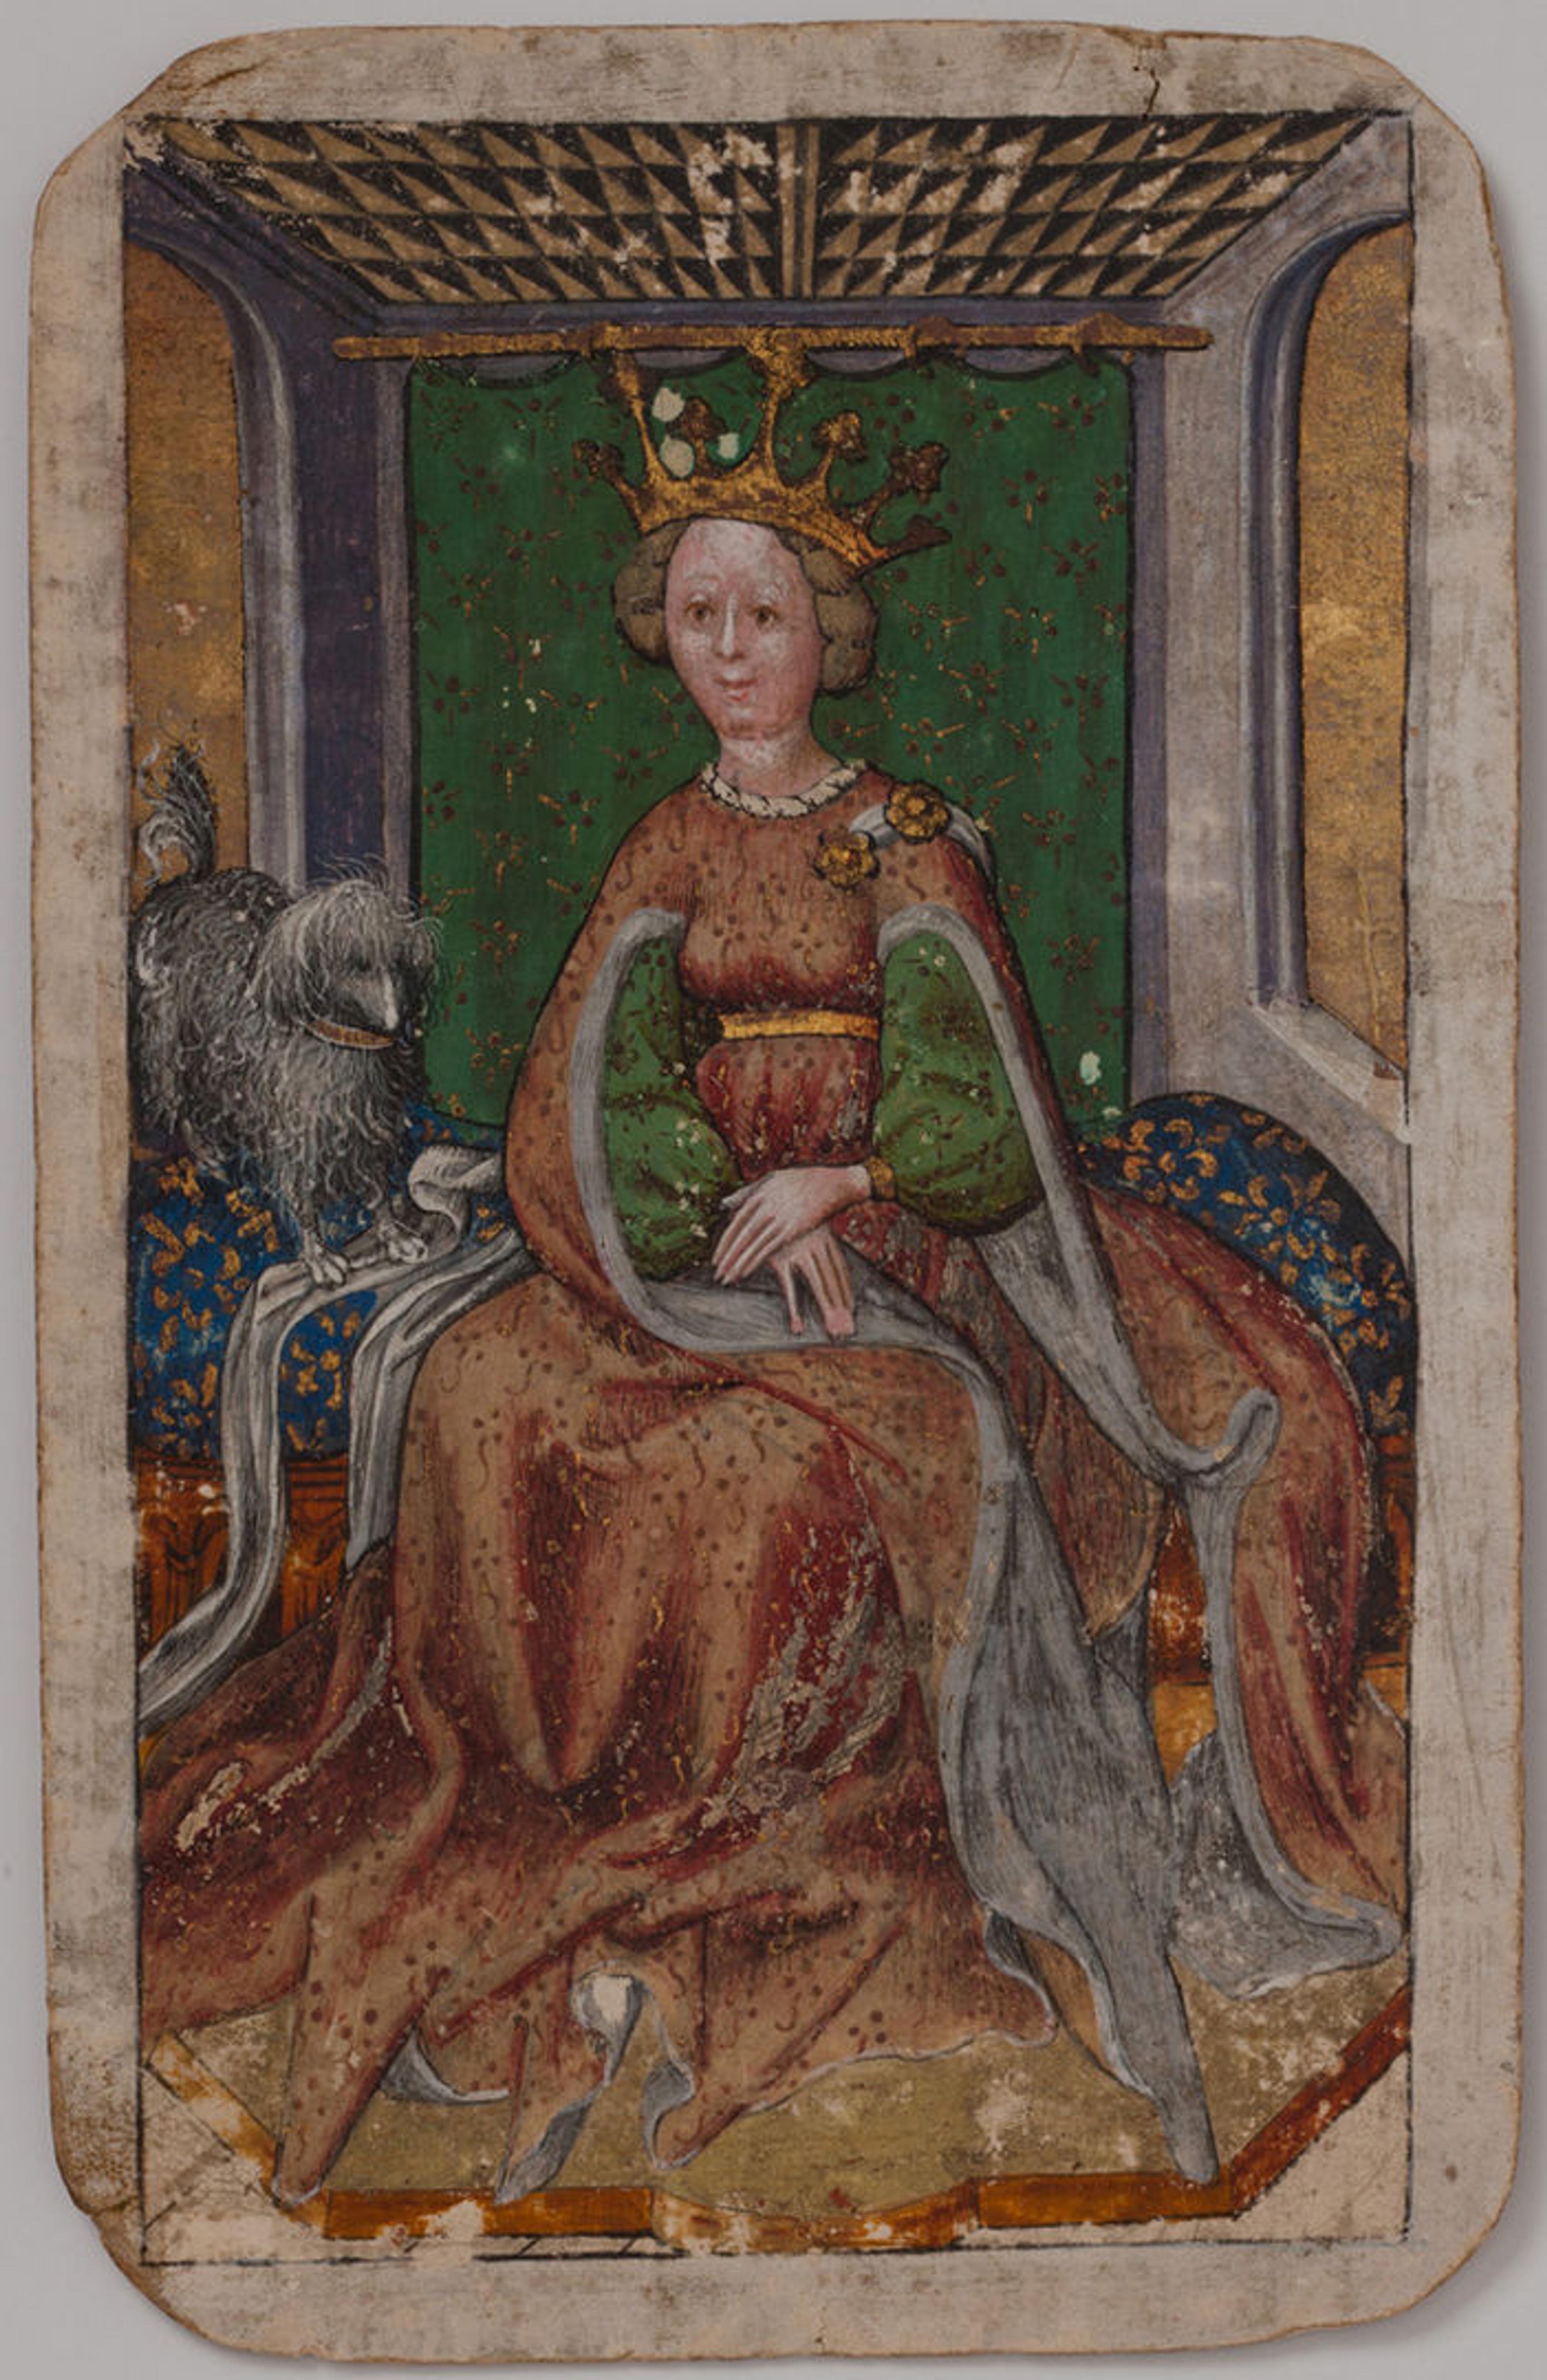 Queen of Hounds, from The Stuttgart Playing Cards, ca. 1430. Made in Upper Rhineland, Germany. Paper (six layers in pasteboard) with gold ground and opaque paint over pen and ink; 7 1/2 x 4 3/4 in. (19.1 x 12.1 cm). Landesmuseum Württemberg, Stuttgart